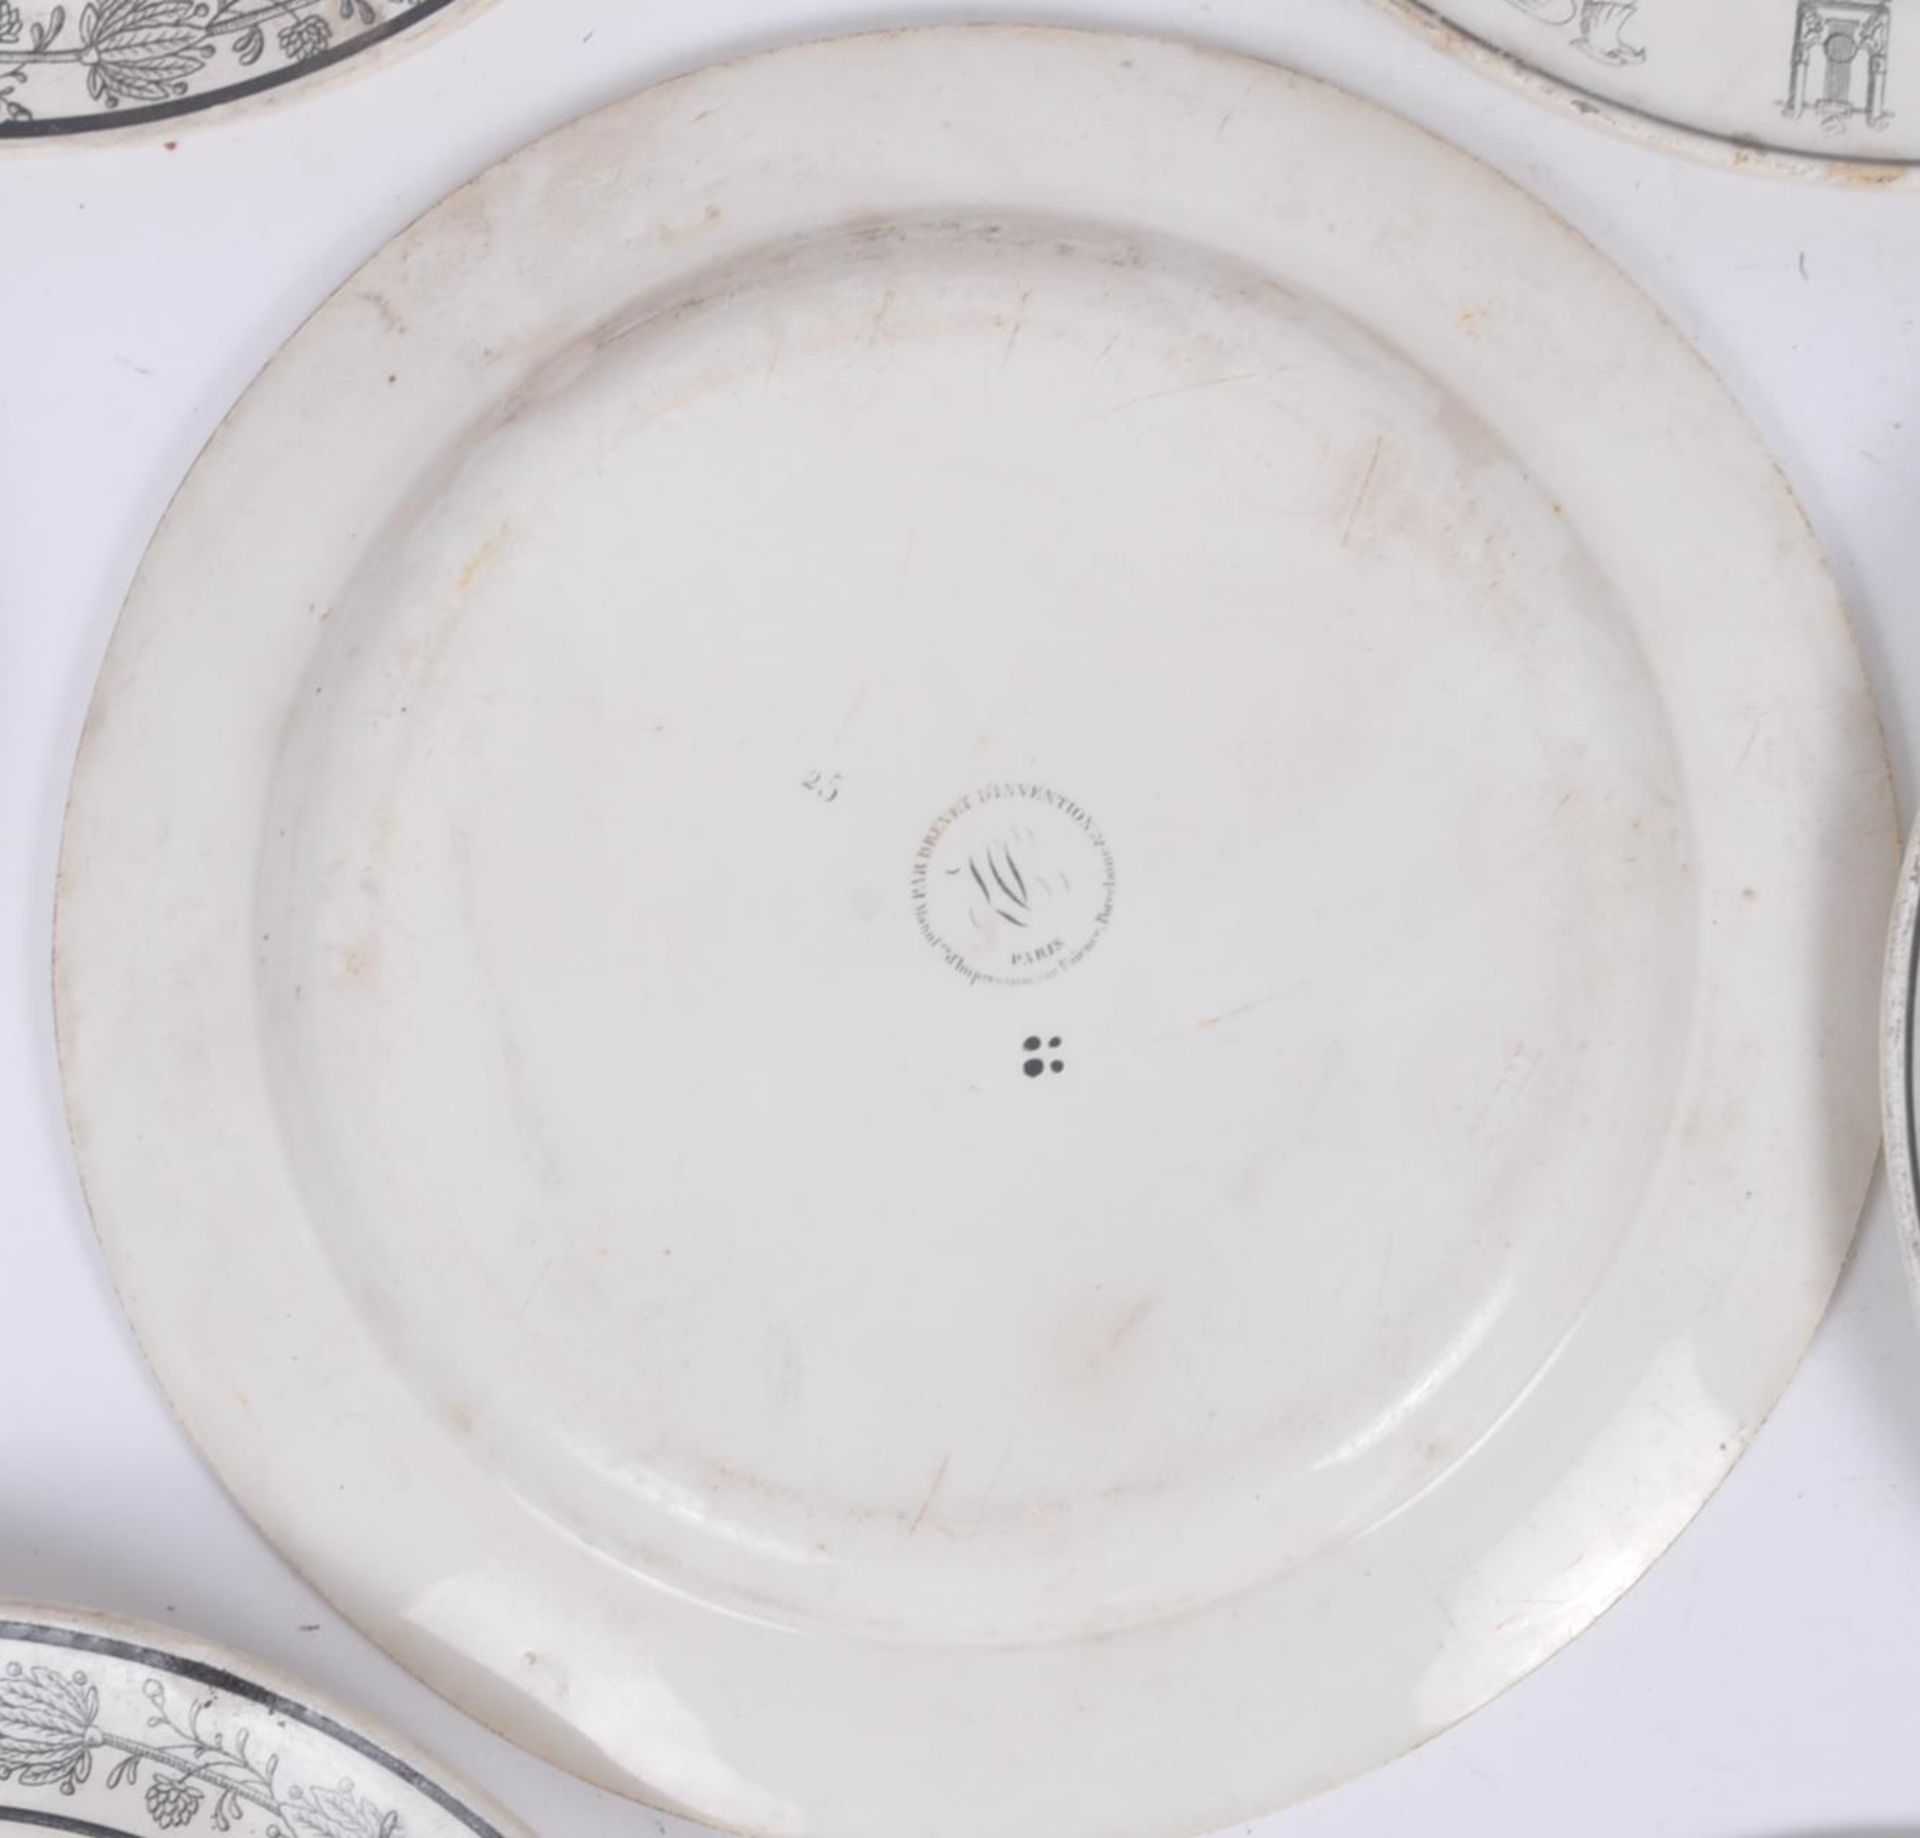 COLLECTION OF ASSORTED MONOCHROME GLAZED PLATES - Image 11 of 11